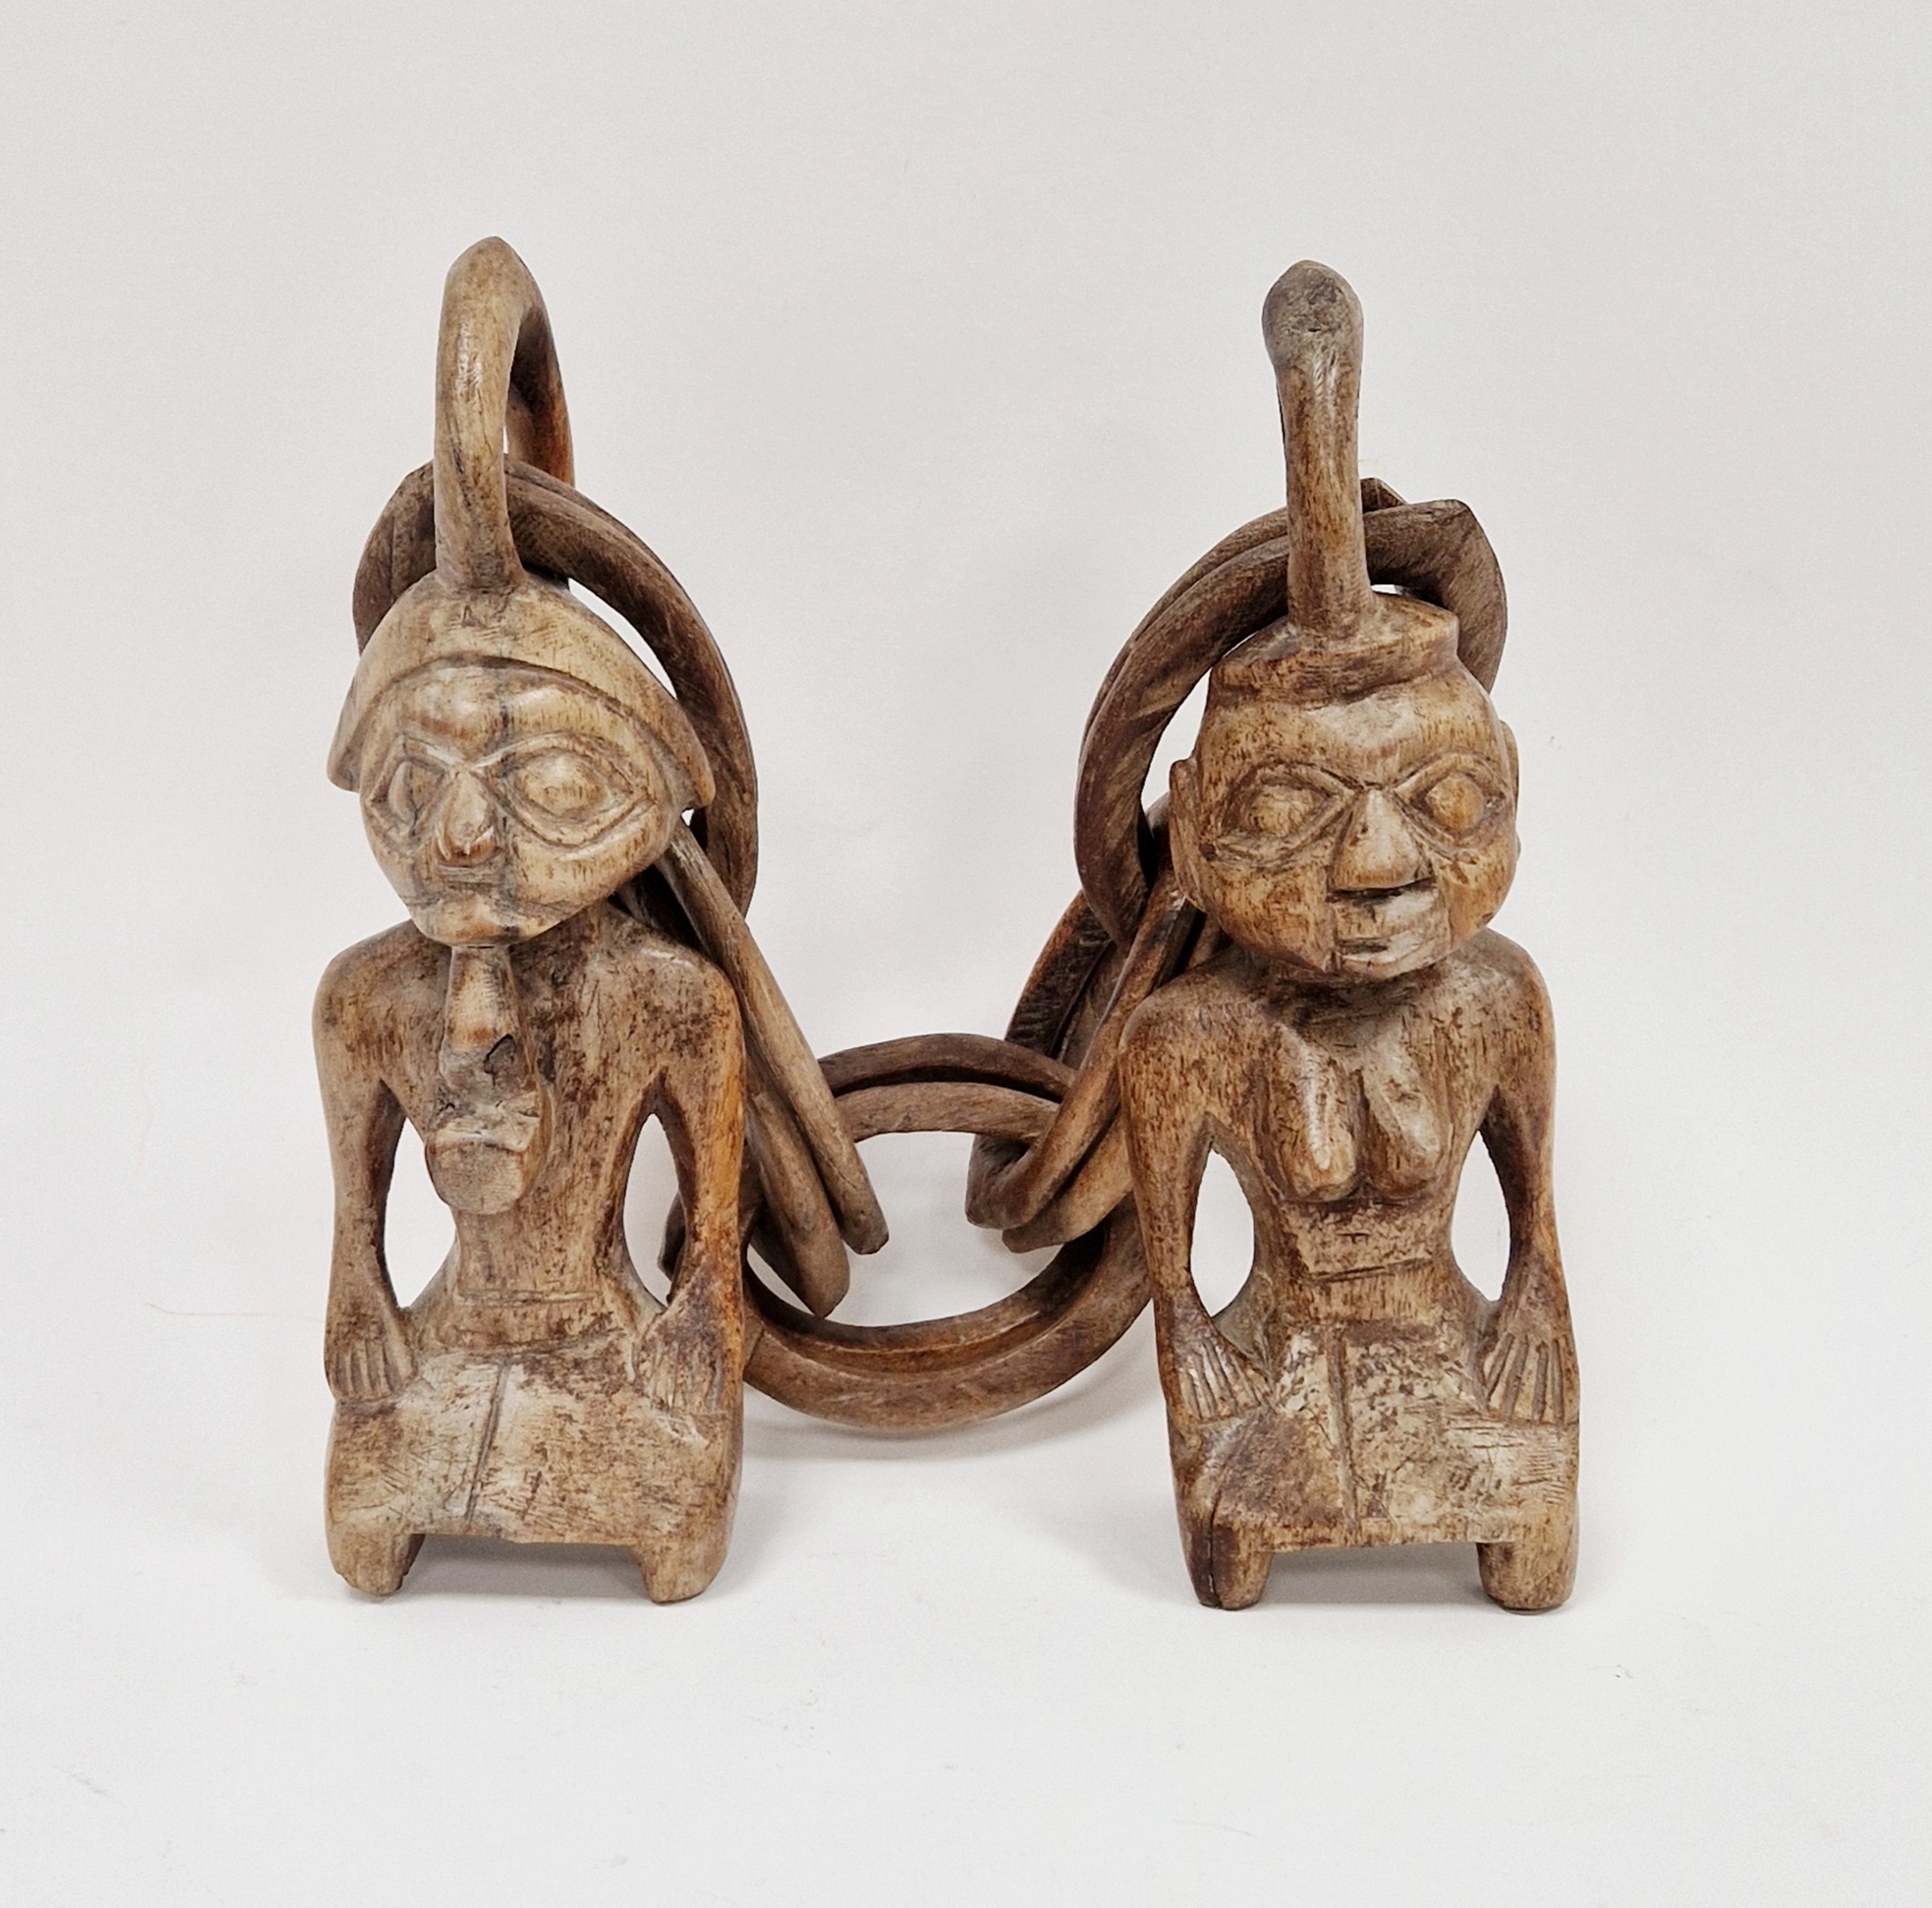 African wedding chain, figures are 19cm high